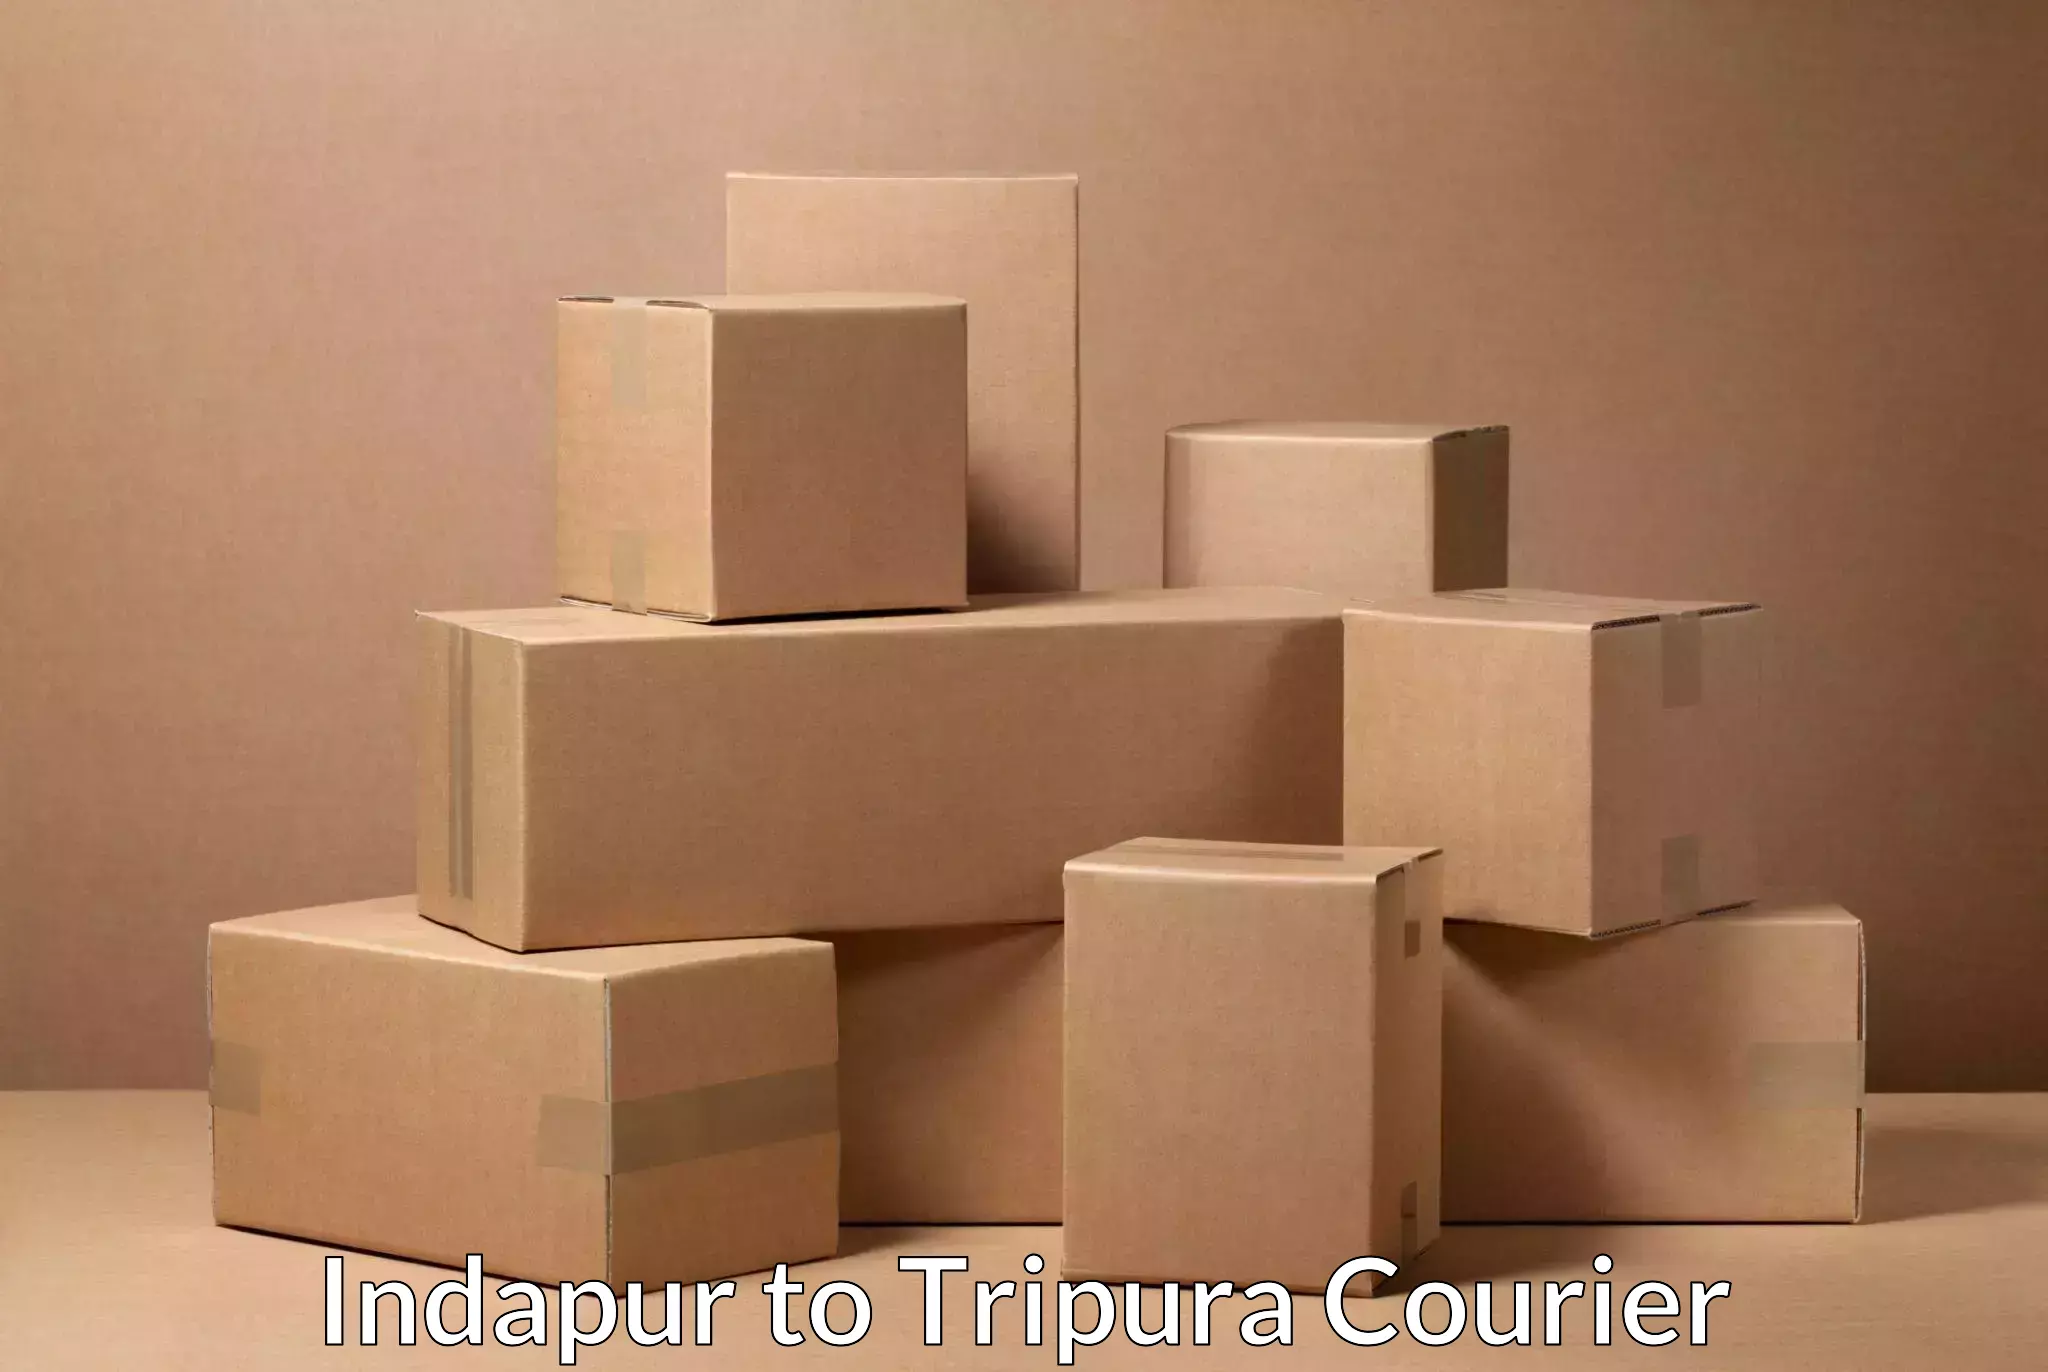 Track and trace shipping Indapur to Udaipur Tripura